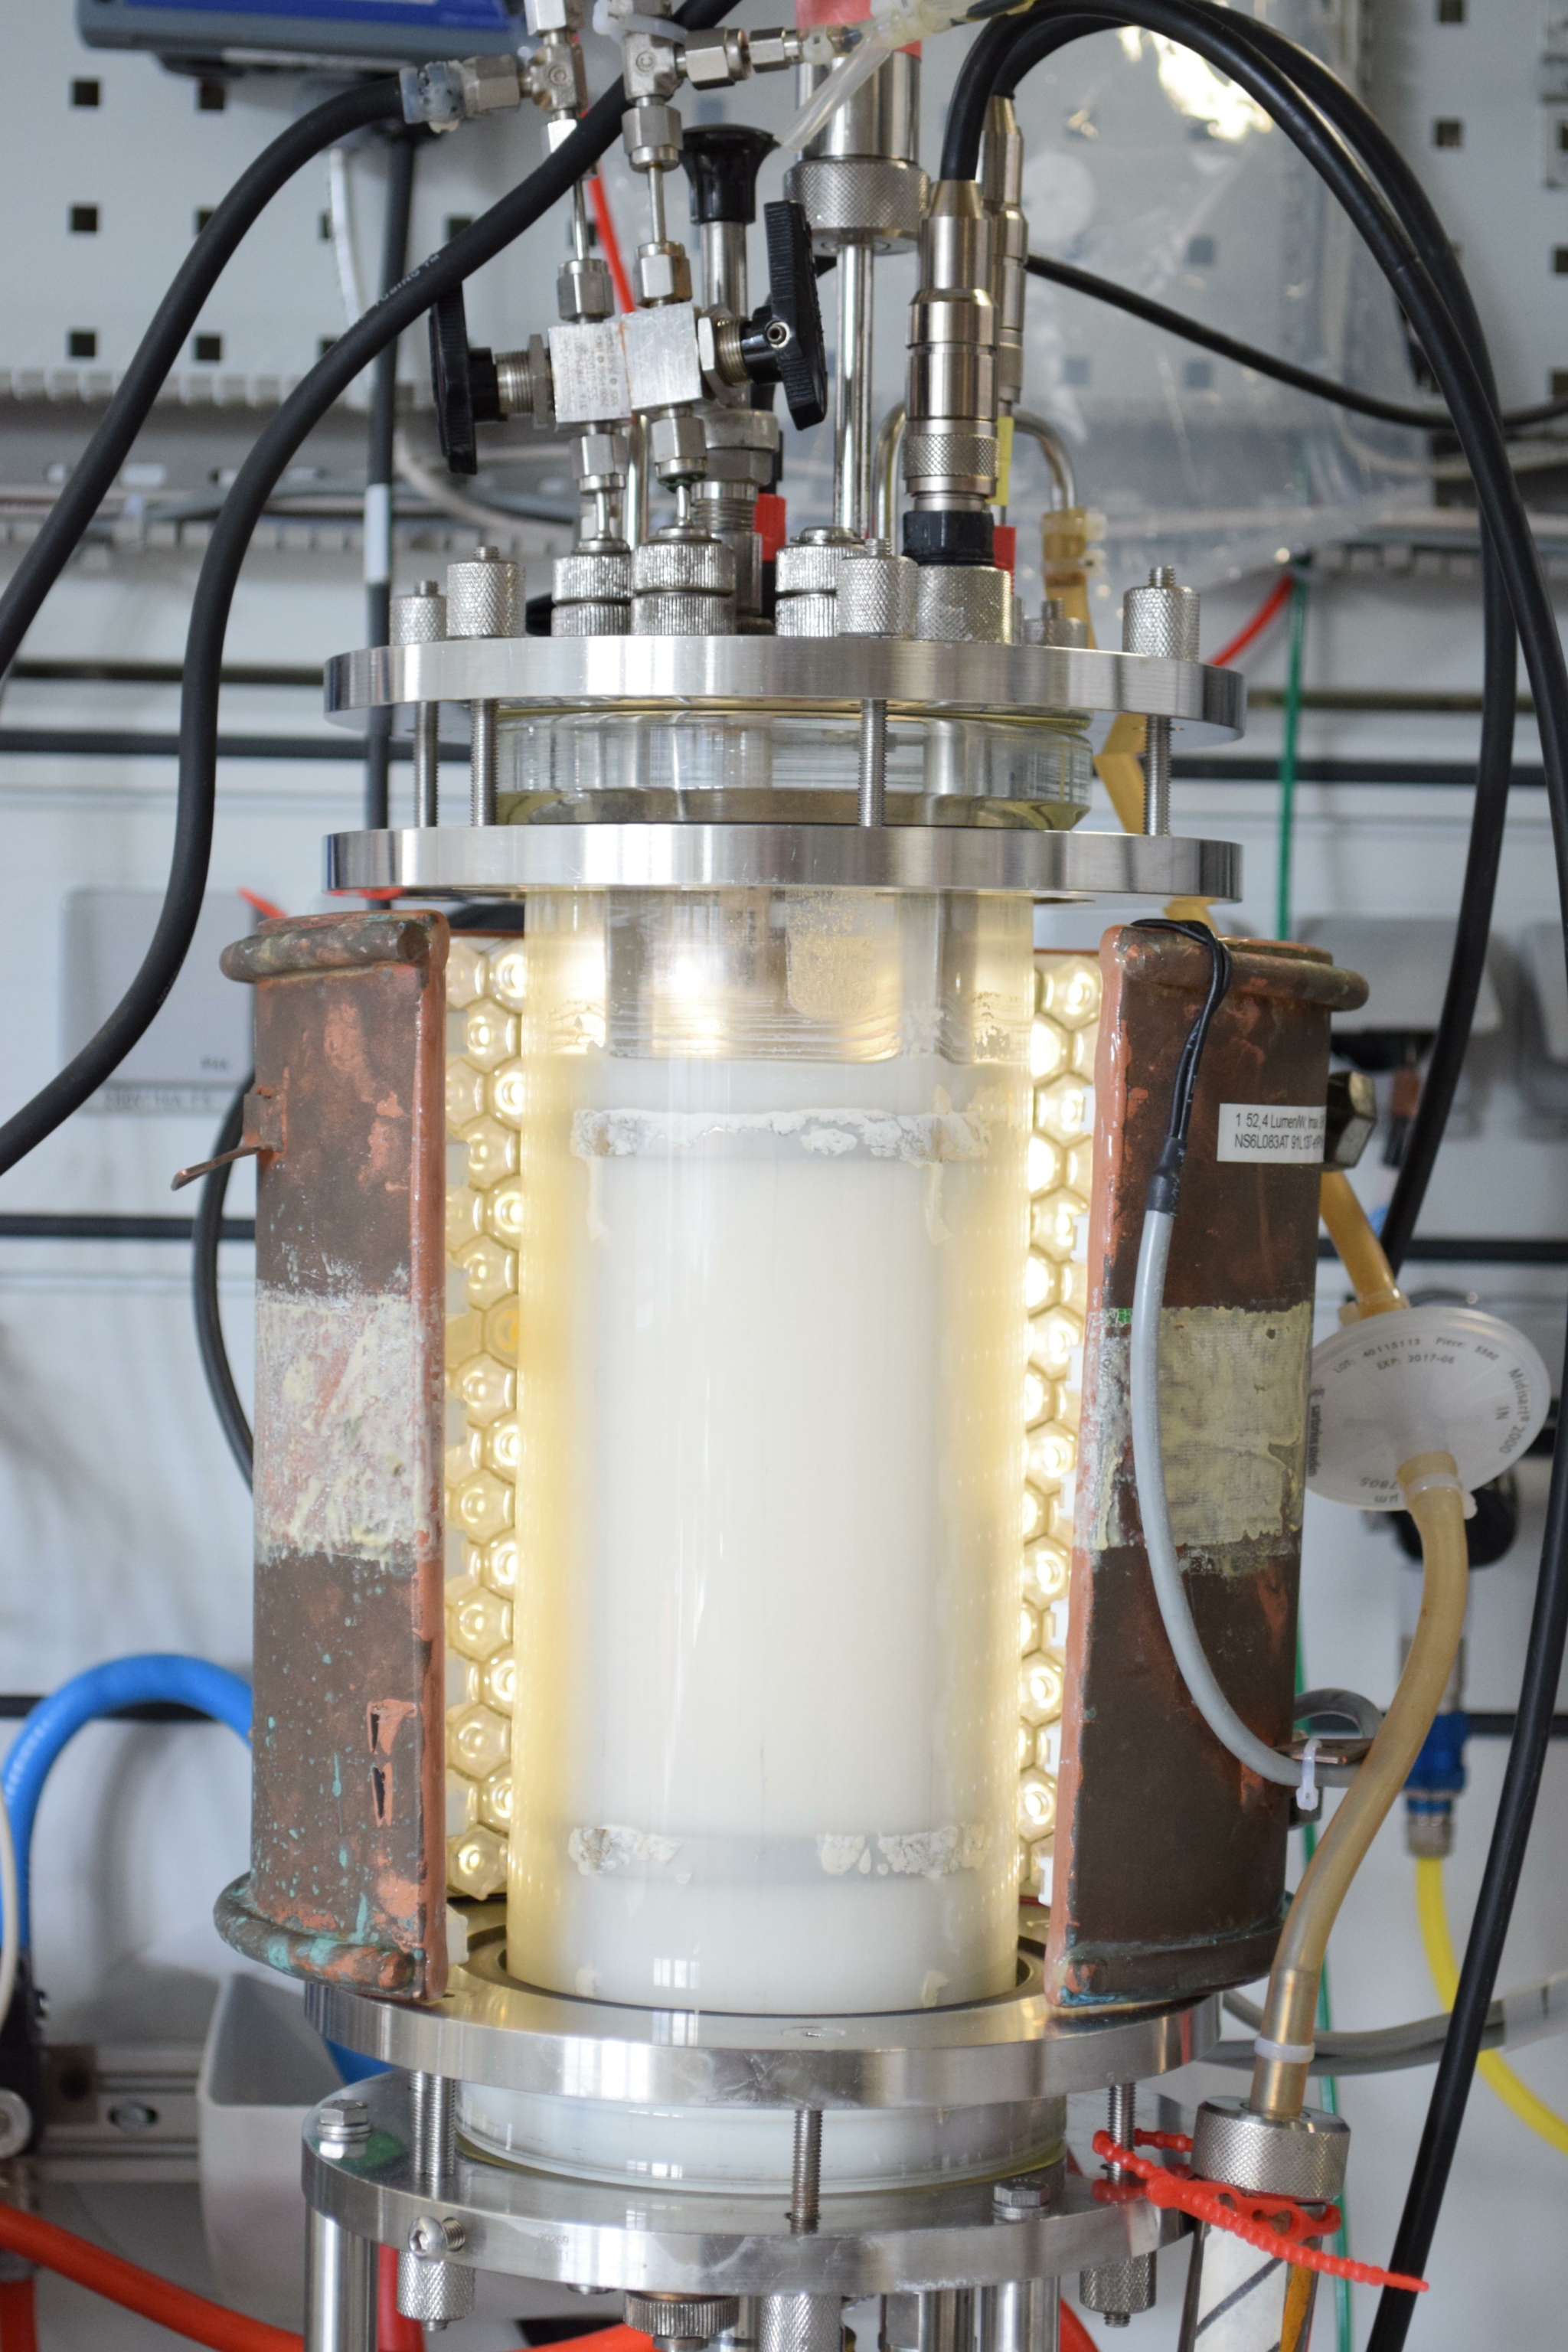 The photo shows a reactor surrounded by an enclosure of light-emitting diodes.